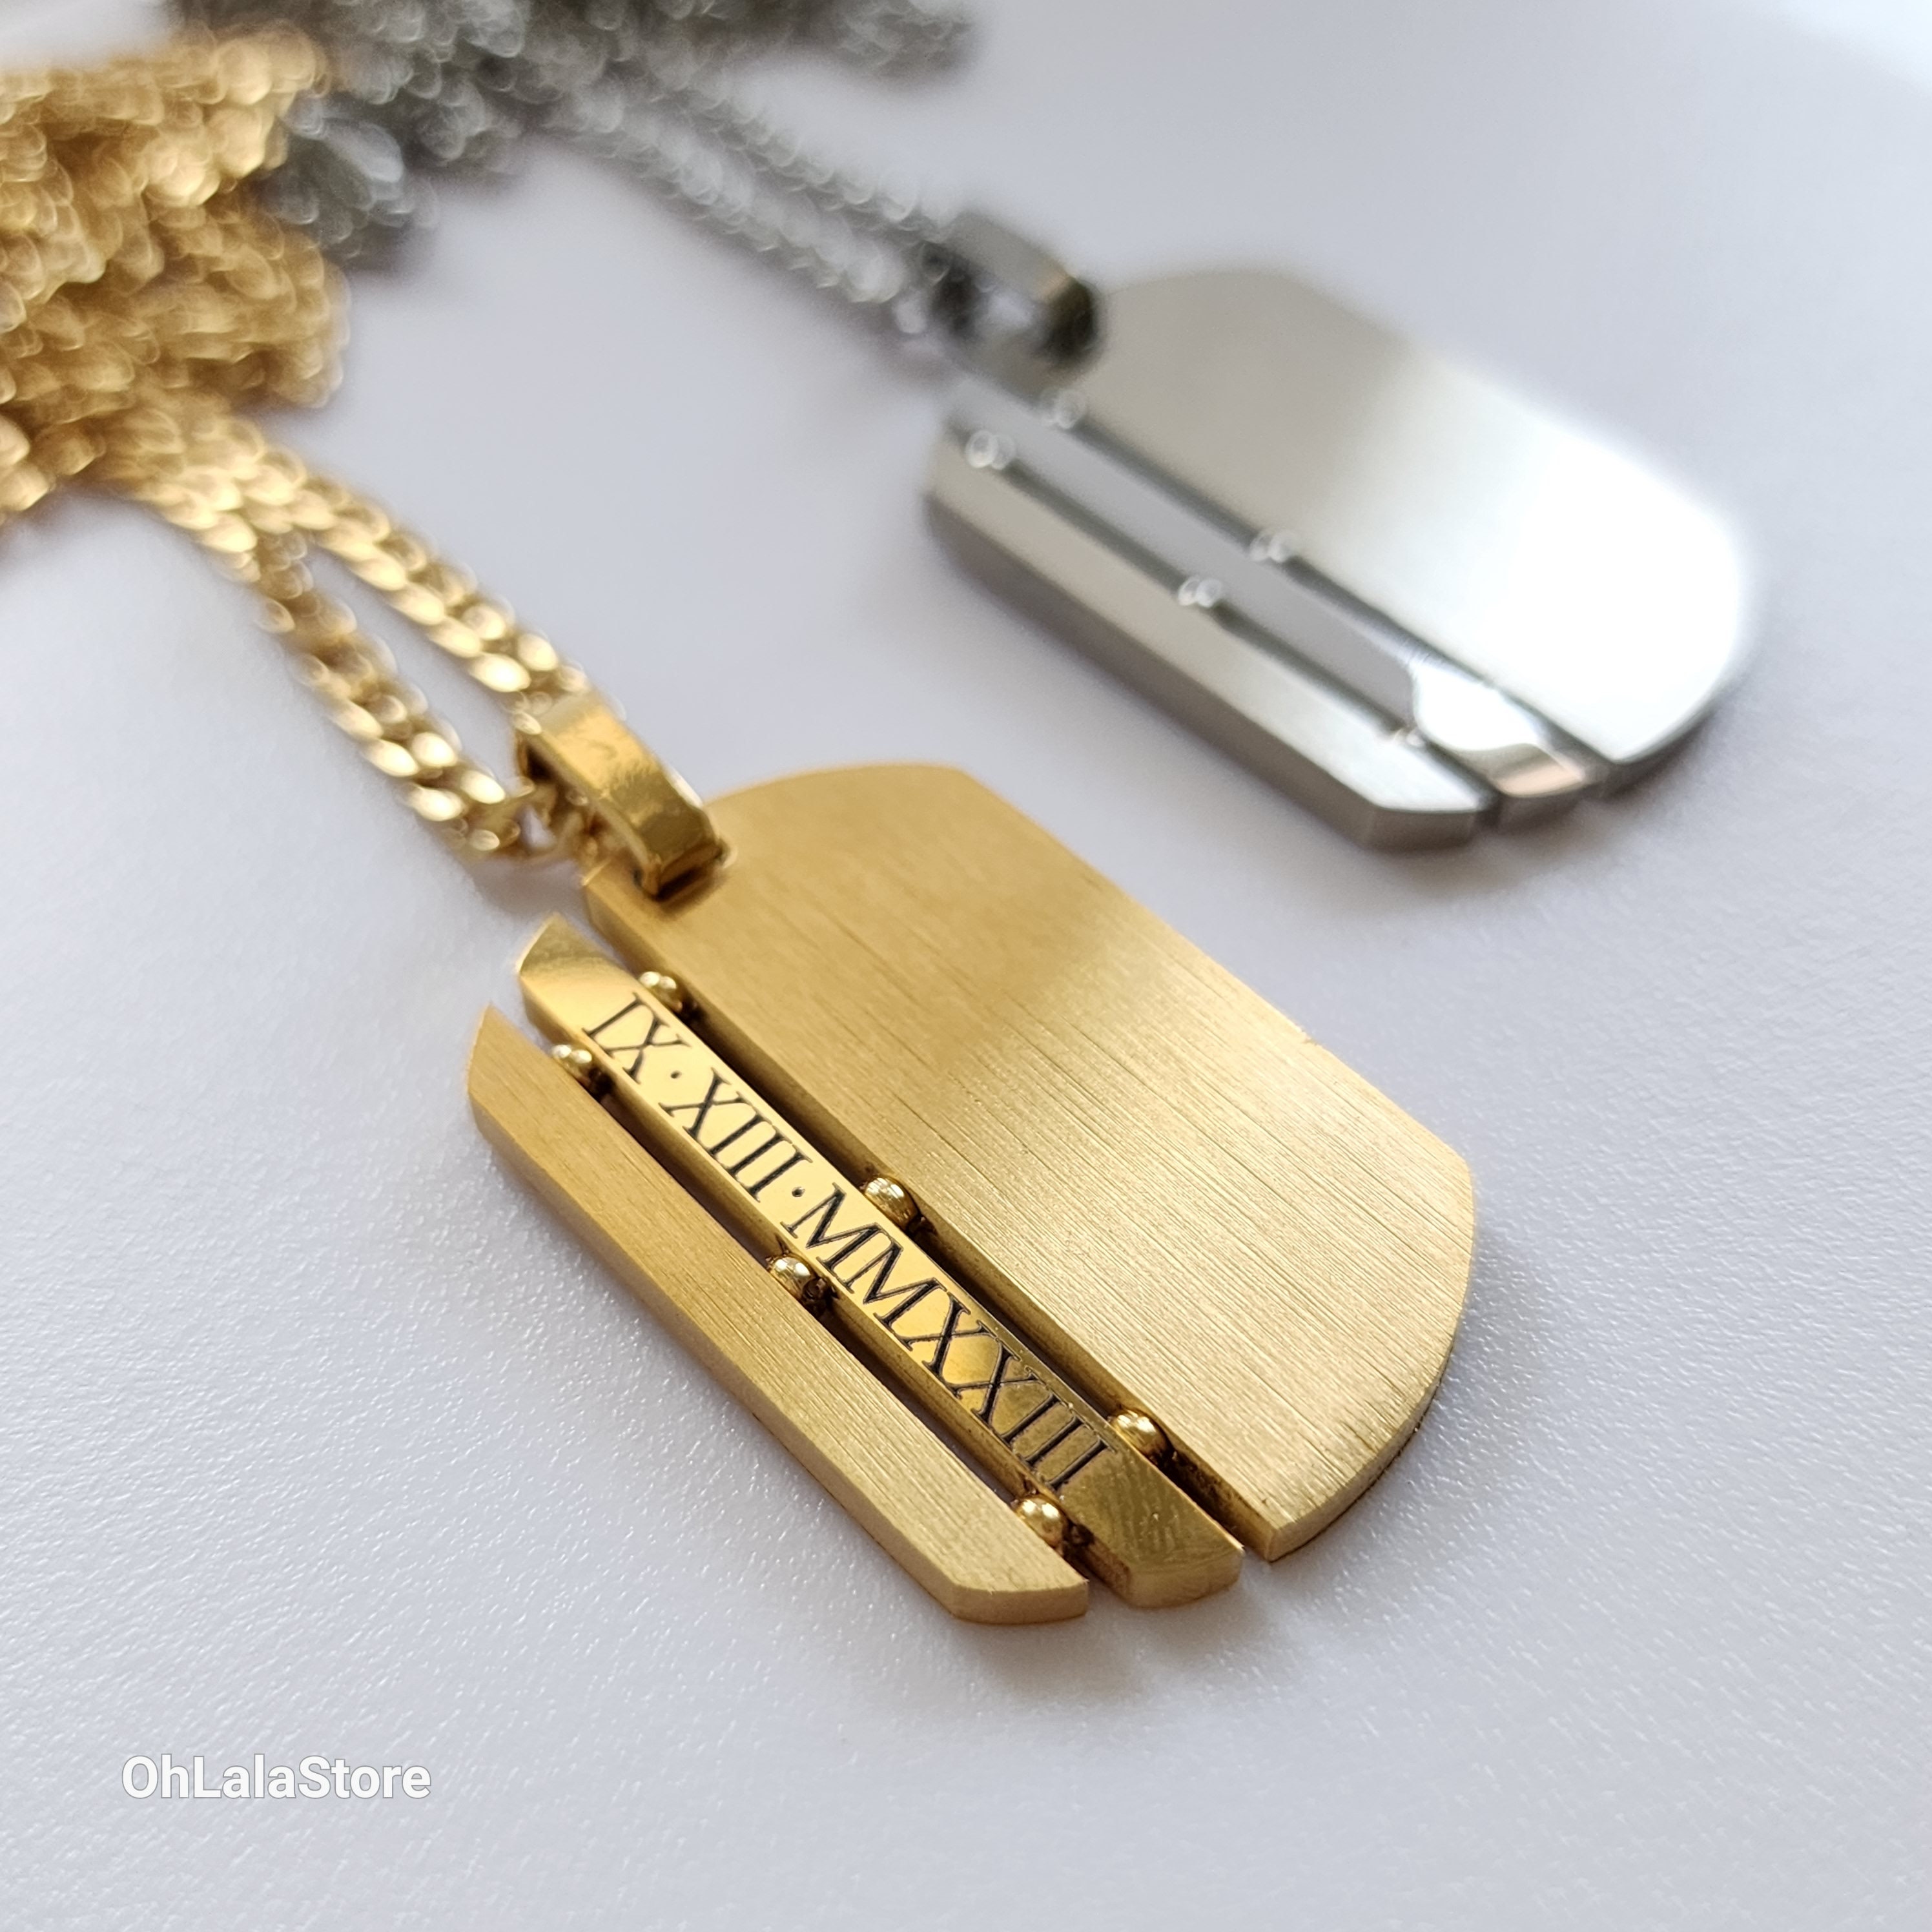 Personalized Gold Dog Tag Pendant - Classic Large Tag Pendant Sterling Silver / Old English